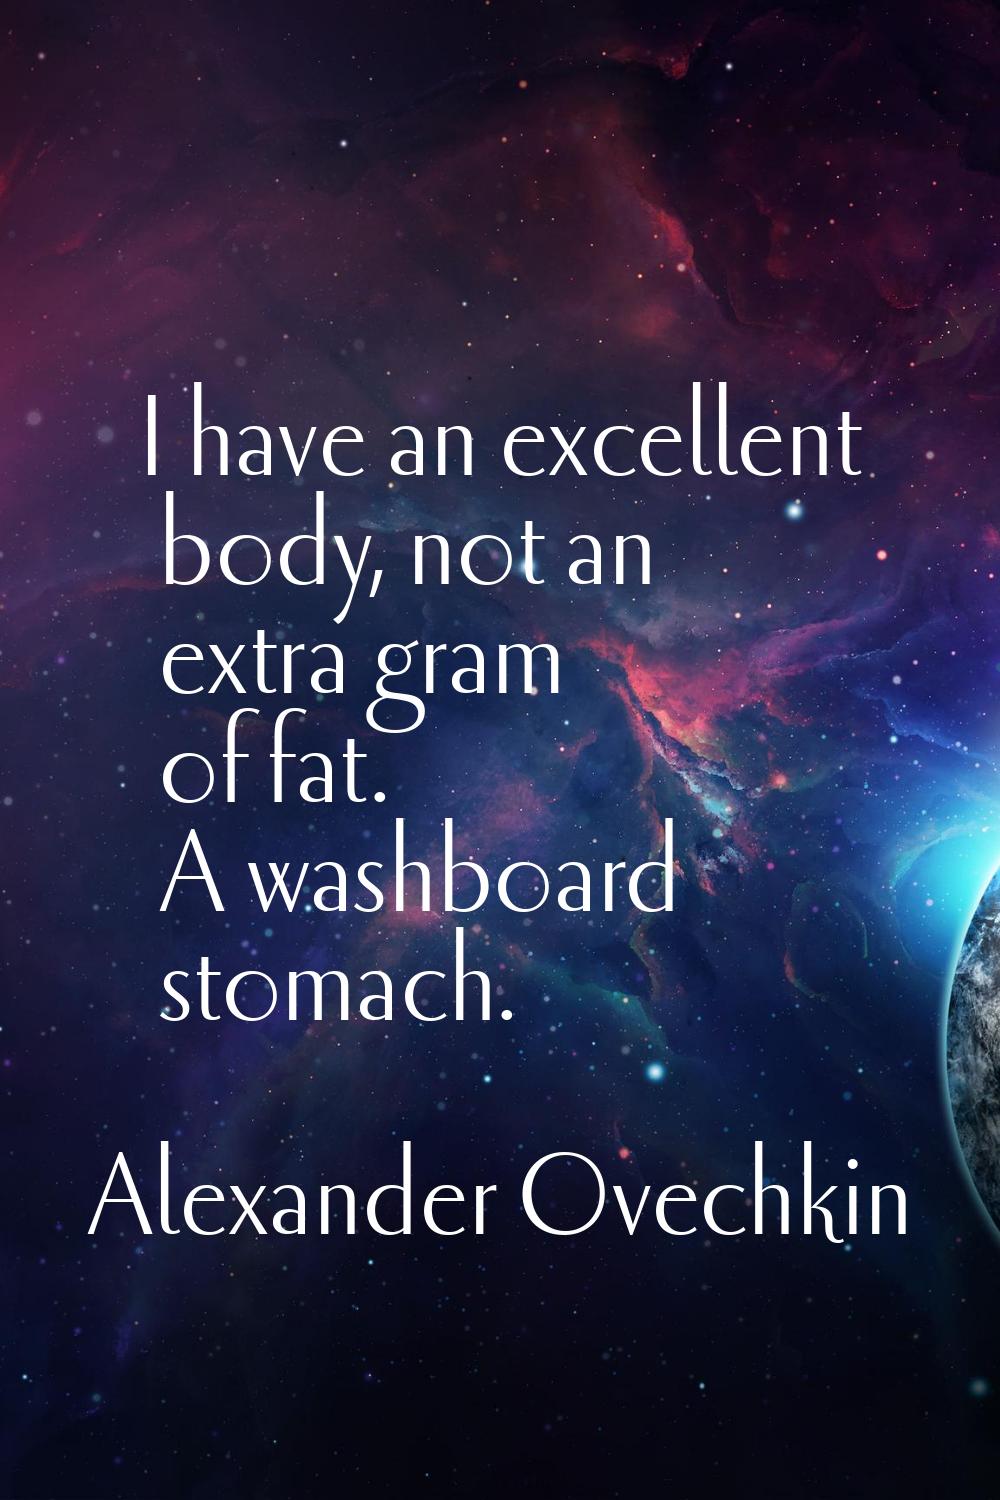 I have an excellent body, not an extra gram of fat. A washboard stomach.